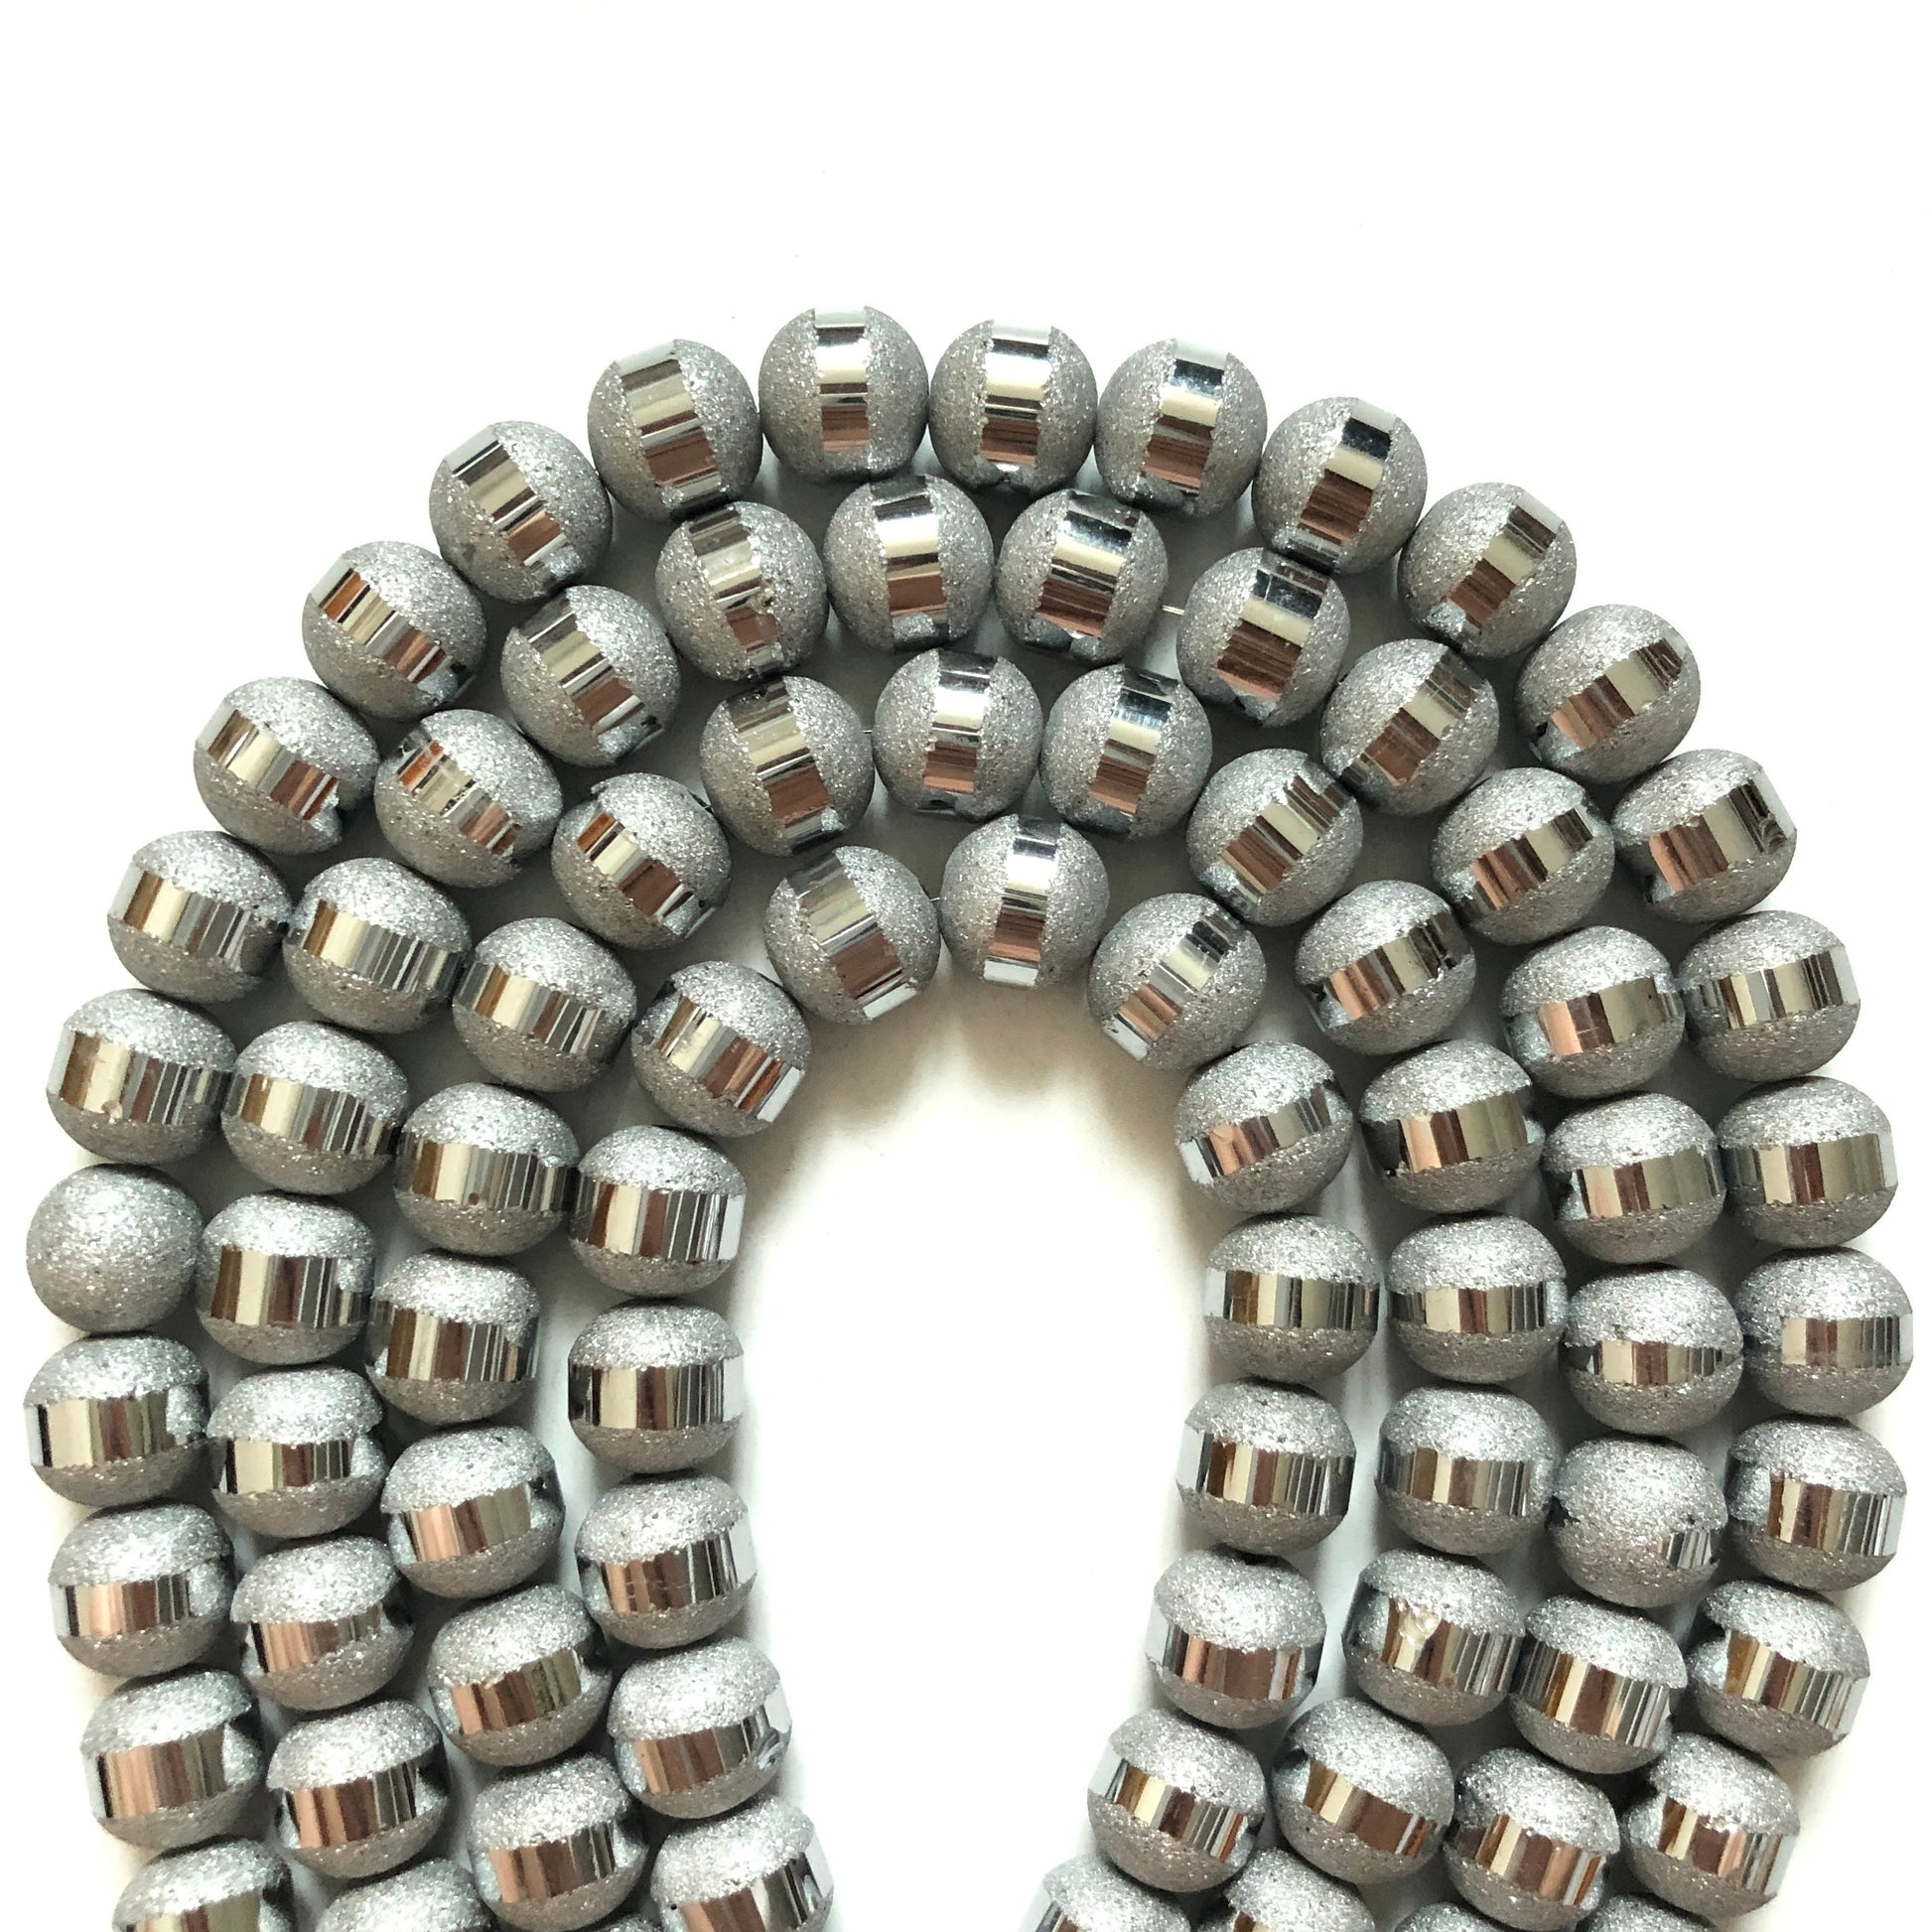 2 Strands/lot 10mm Electroplated Half Matte Round Glass Beads-Silver Glass Beads Round Glass Beads Charms Beads Beyond